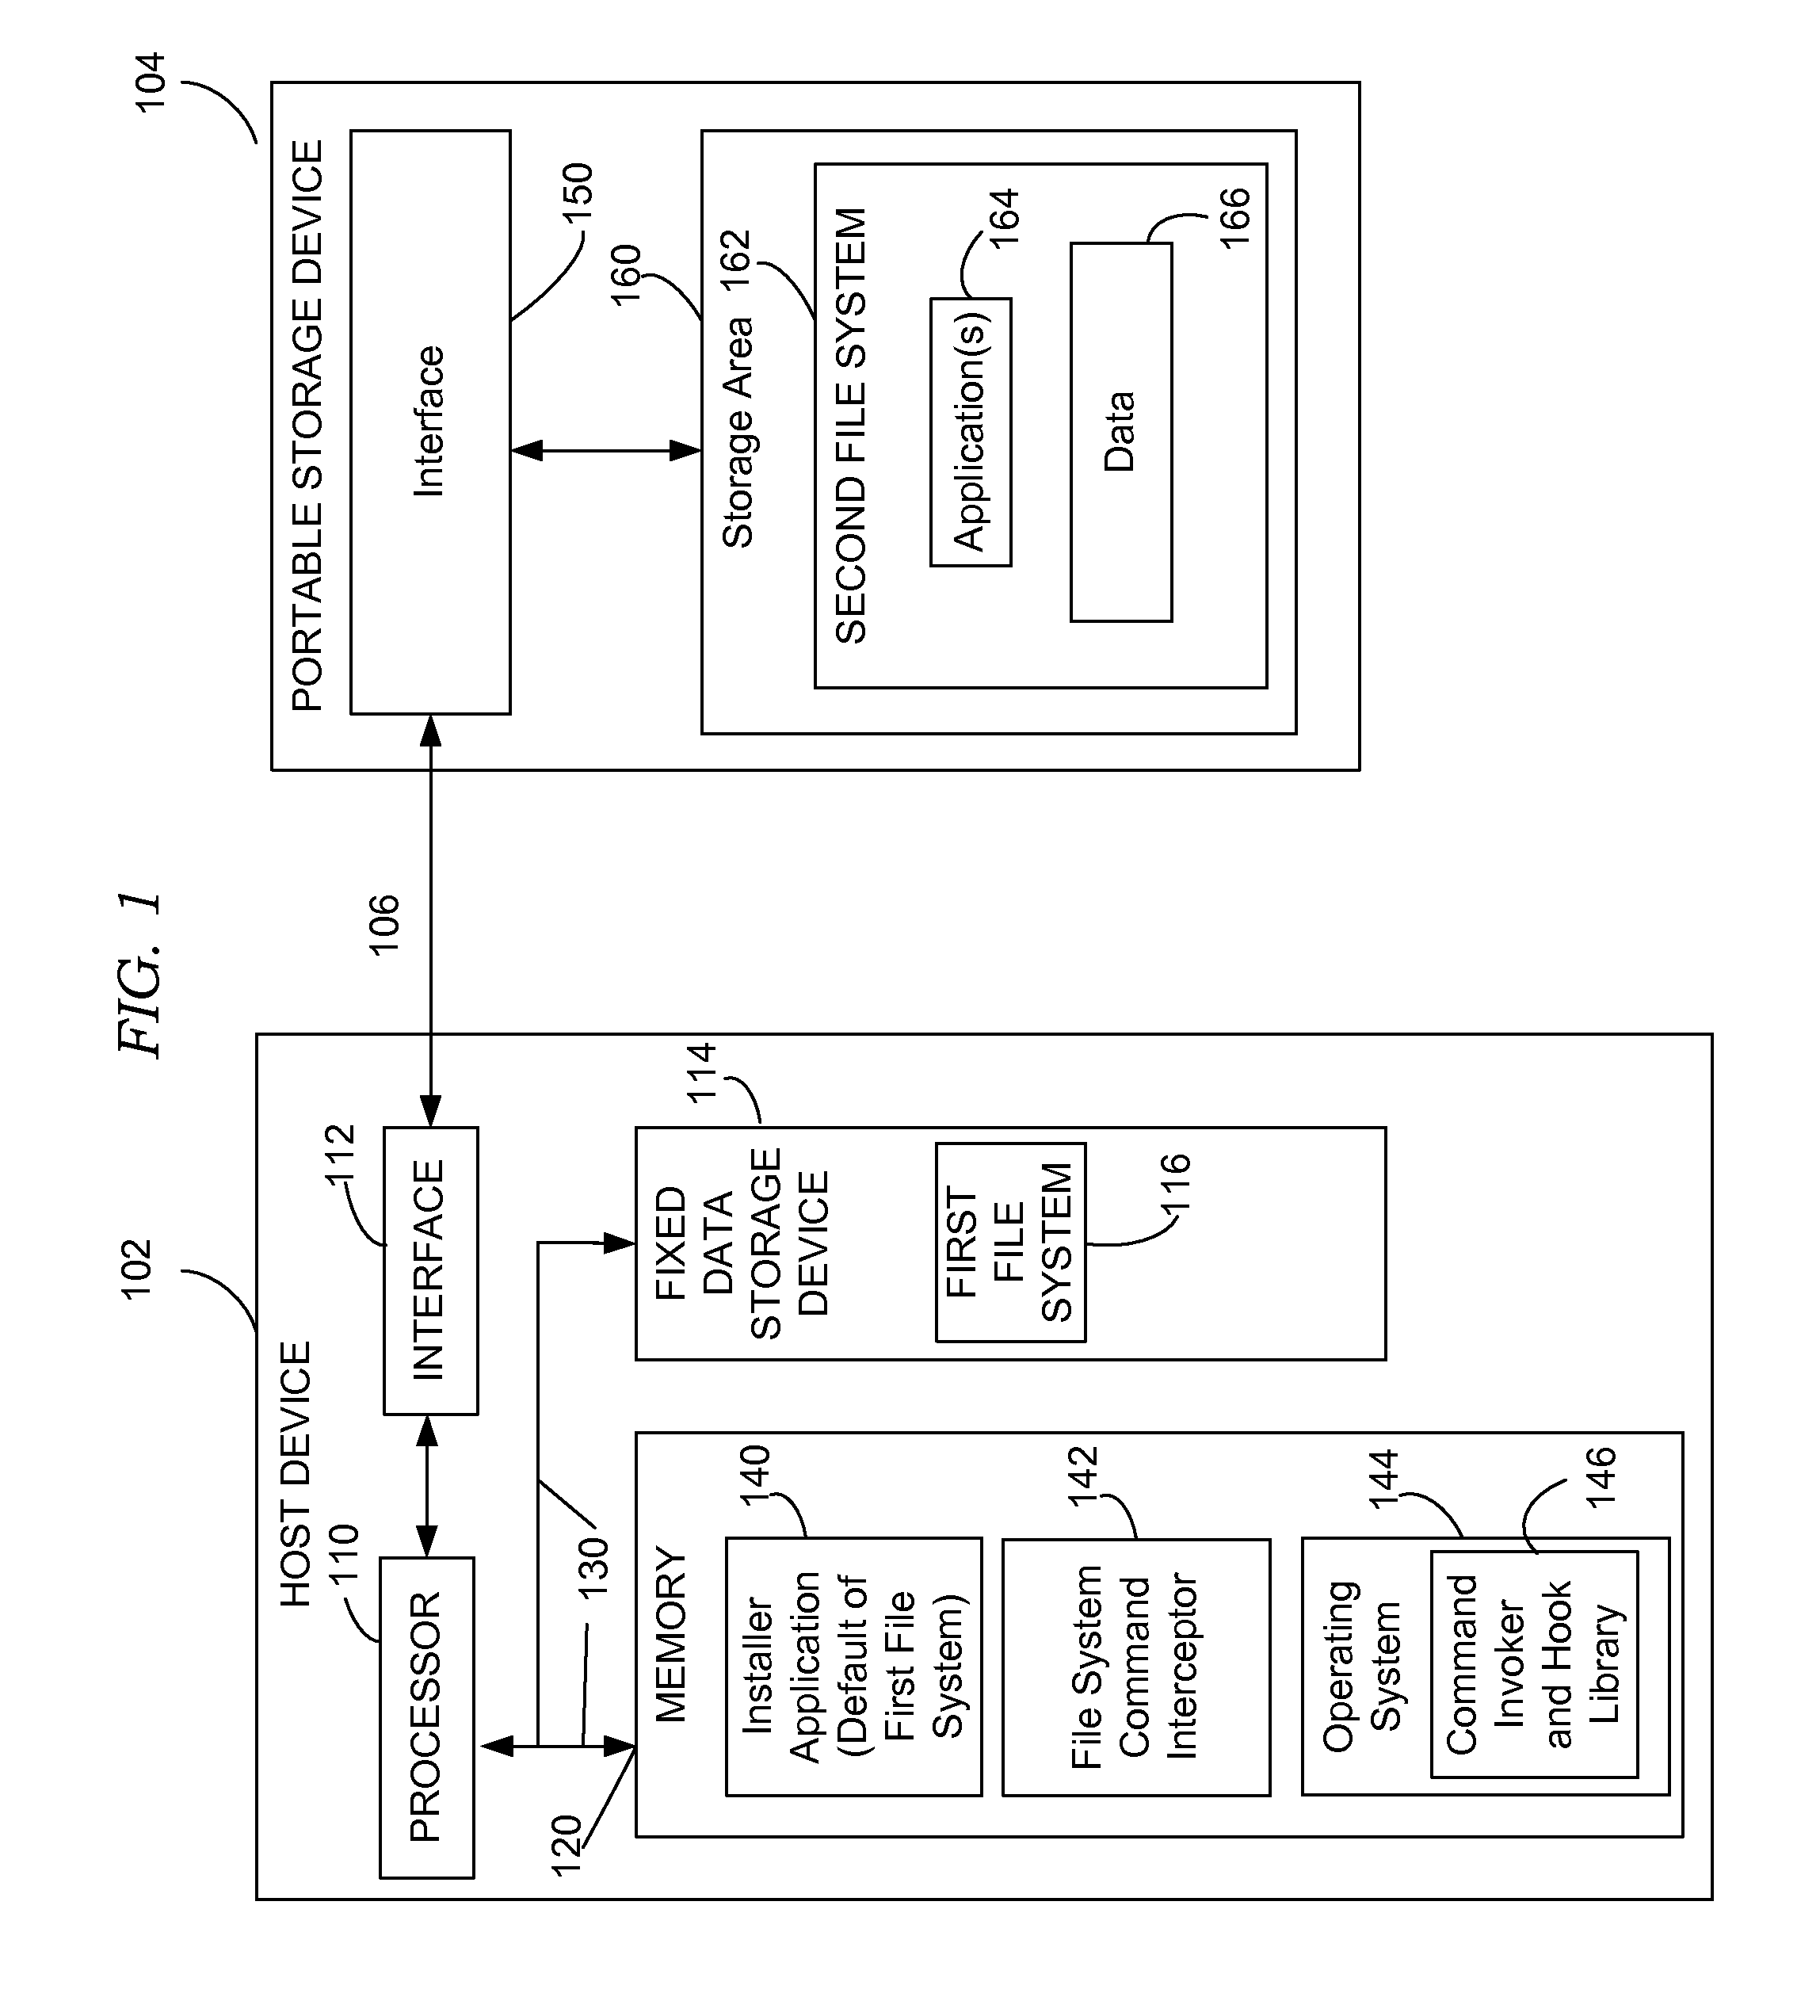 Dynamic file system restriction for portable storage devices